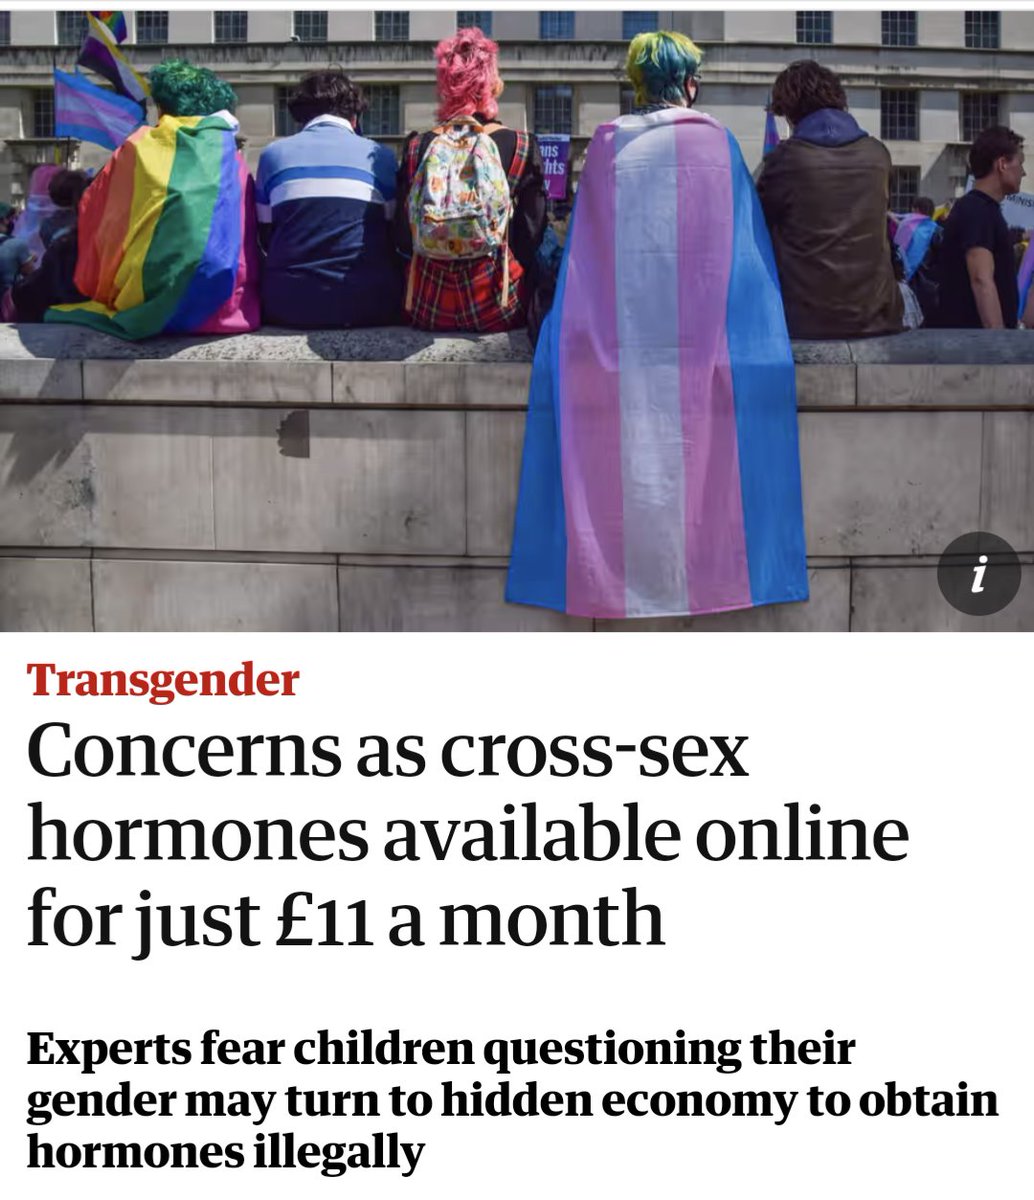 Unsurprising but beyond frustrating to read this headline in the Guardian, which has been cheerleading the destruction of sanctioned pathways to puberty blockers and hormone therapy for trans youth. Block those pathways, people turn to DIY. It's simple.